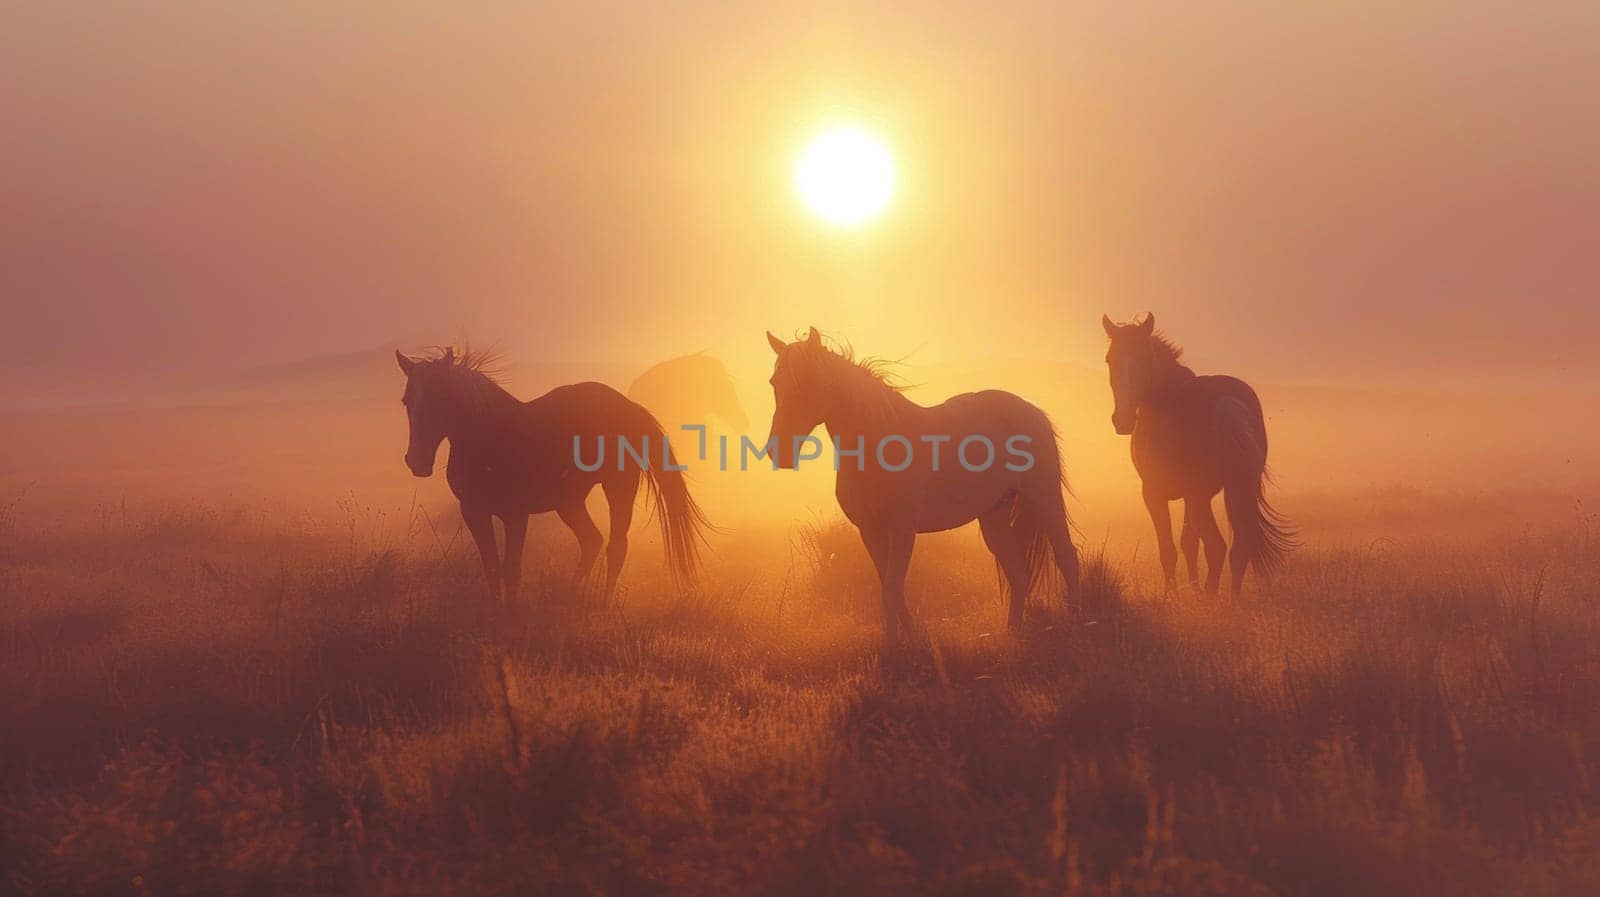 Three horses are standing in a field with the sun setting